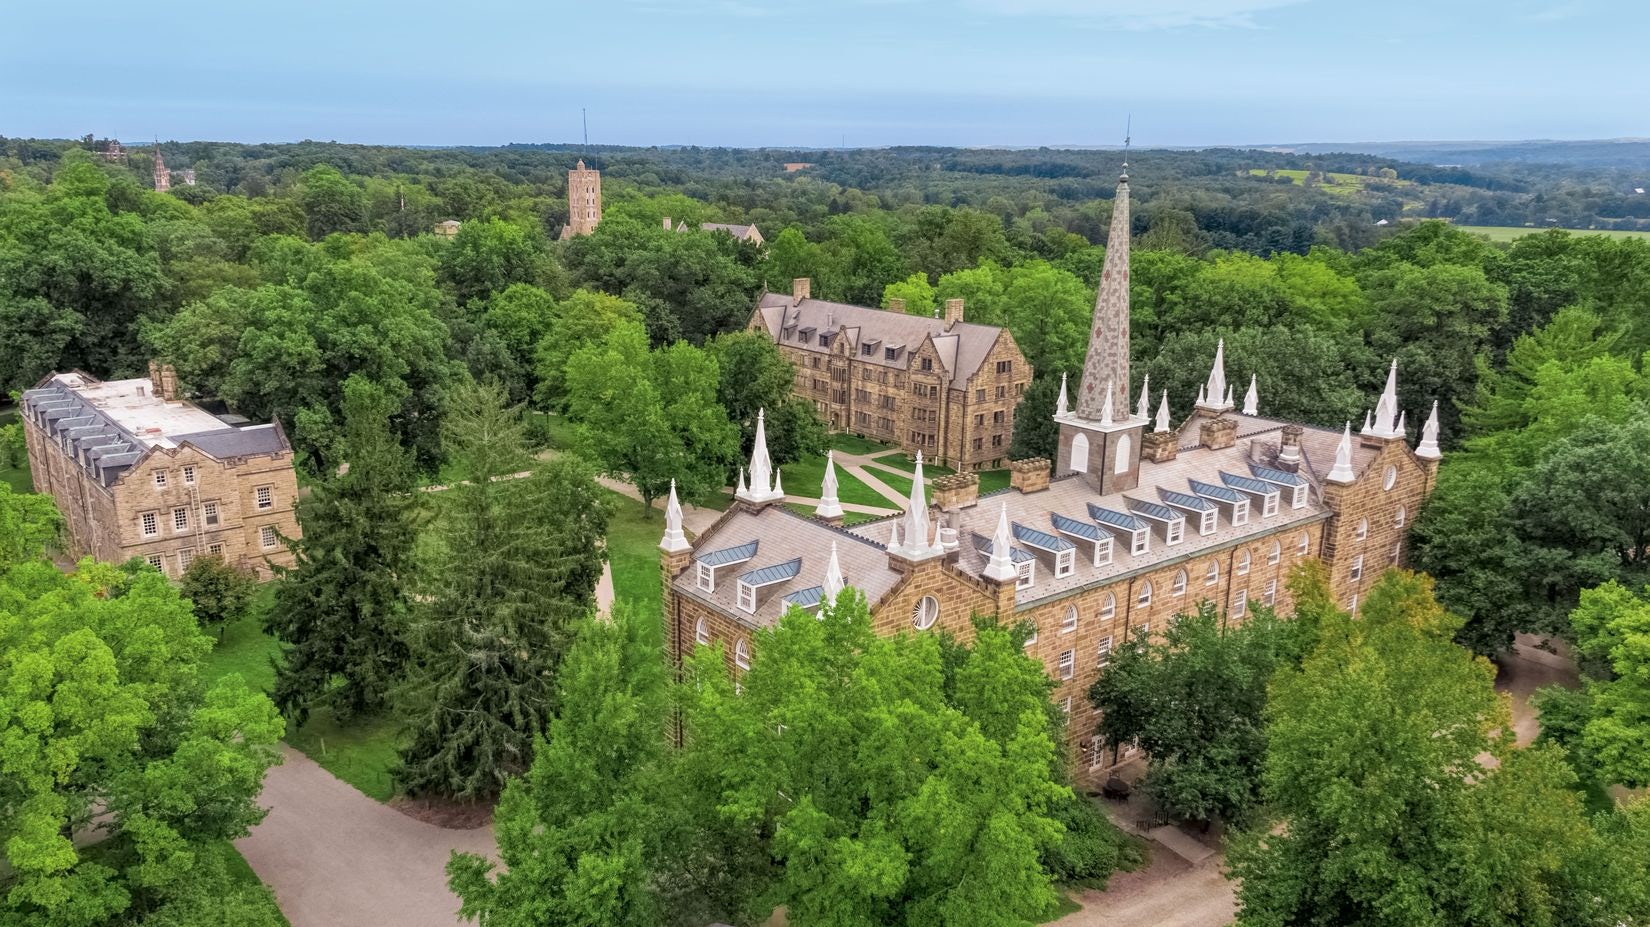 An aerial view of Kenyon's South Quad showing Old Kenyon, Leonard, and Hanna Residence Halls.